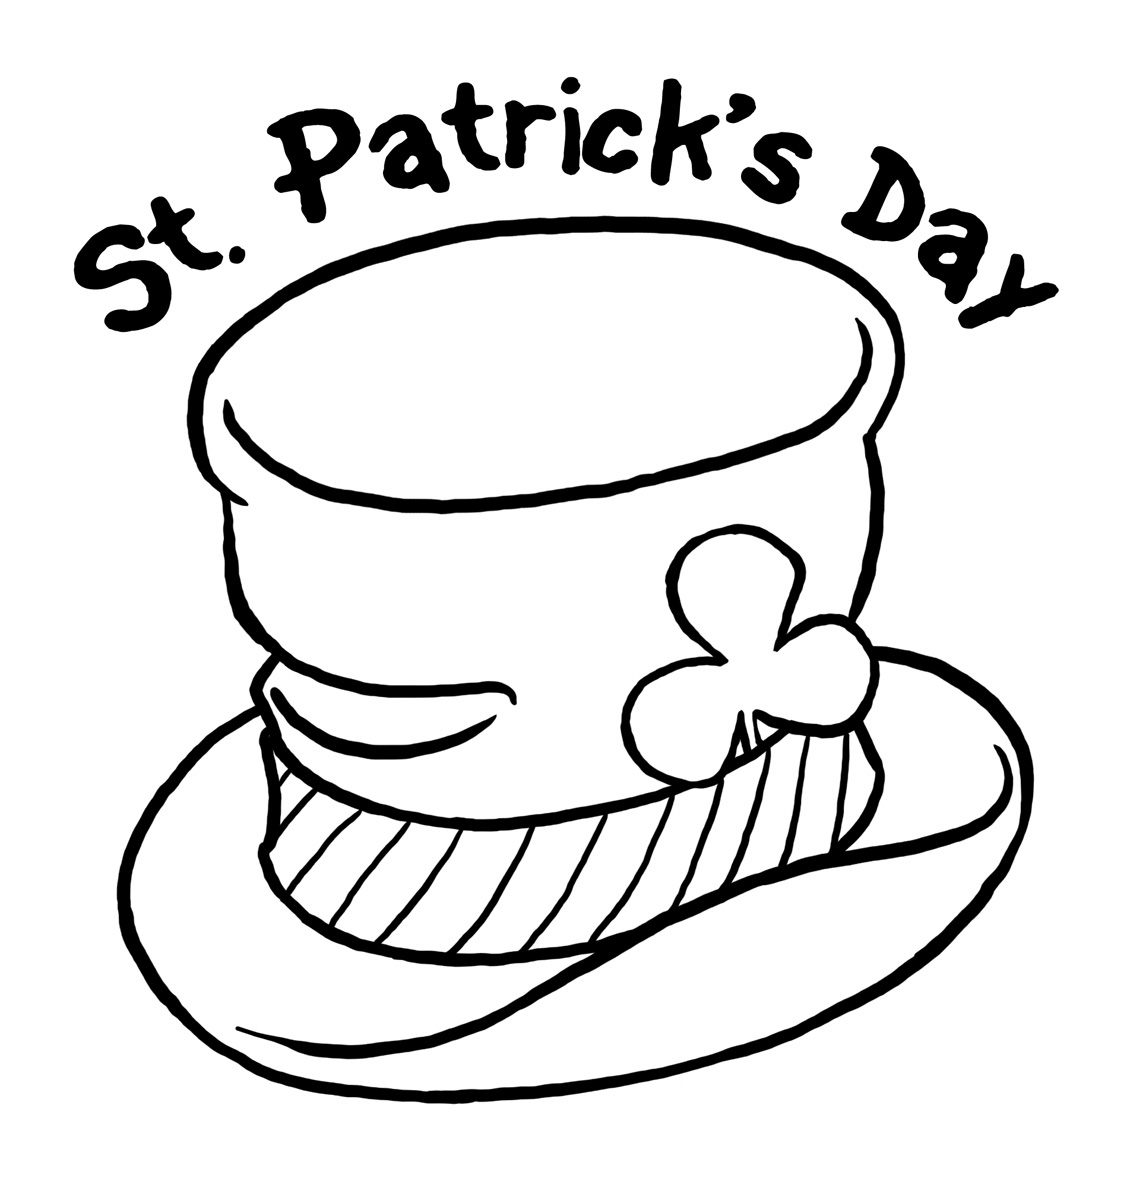 printable-st-patrick-coloring-pages-religious-st-patrick-coloring